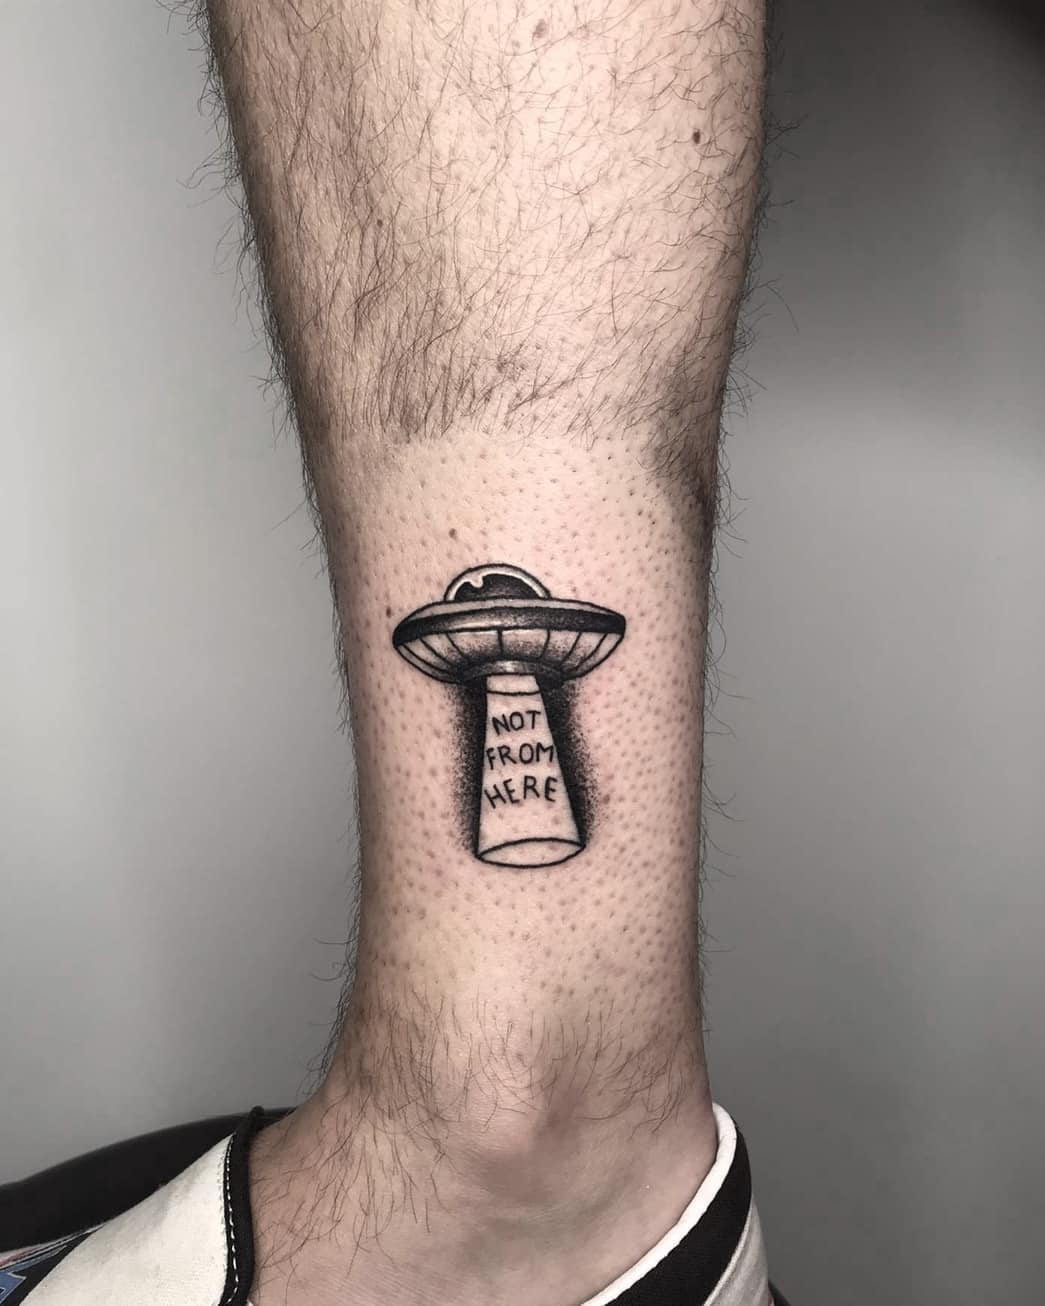  RB23  on Twitter Tattoo update I now have the Mars attacks  alien coloured Next up some galaxy httpstcoYuOuBsX6ks  Twitter